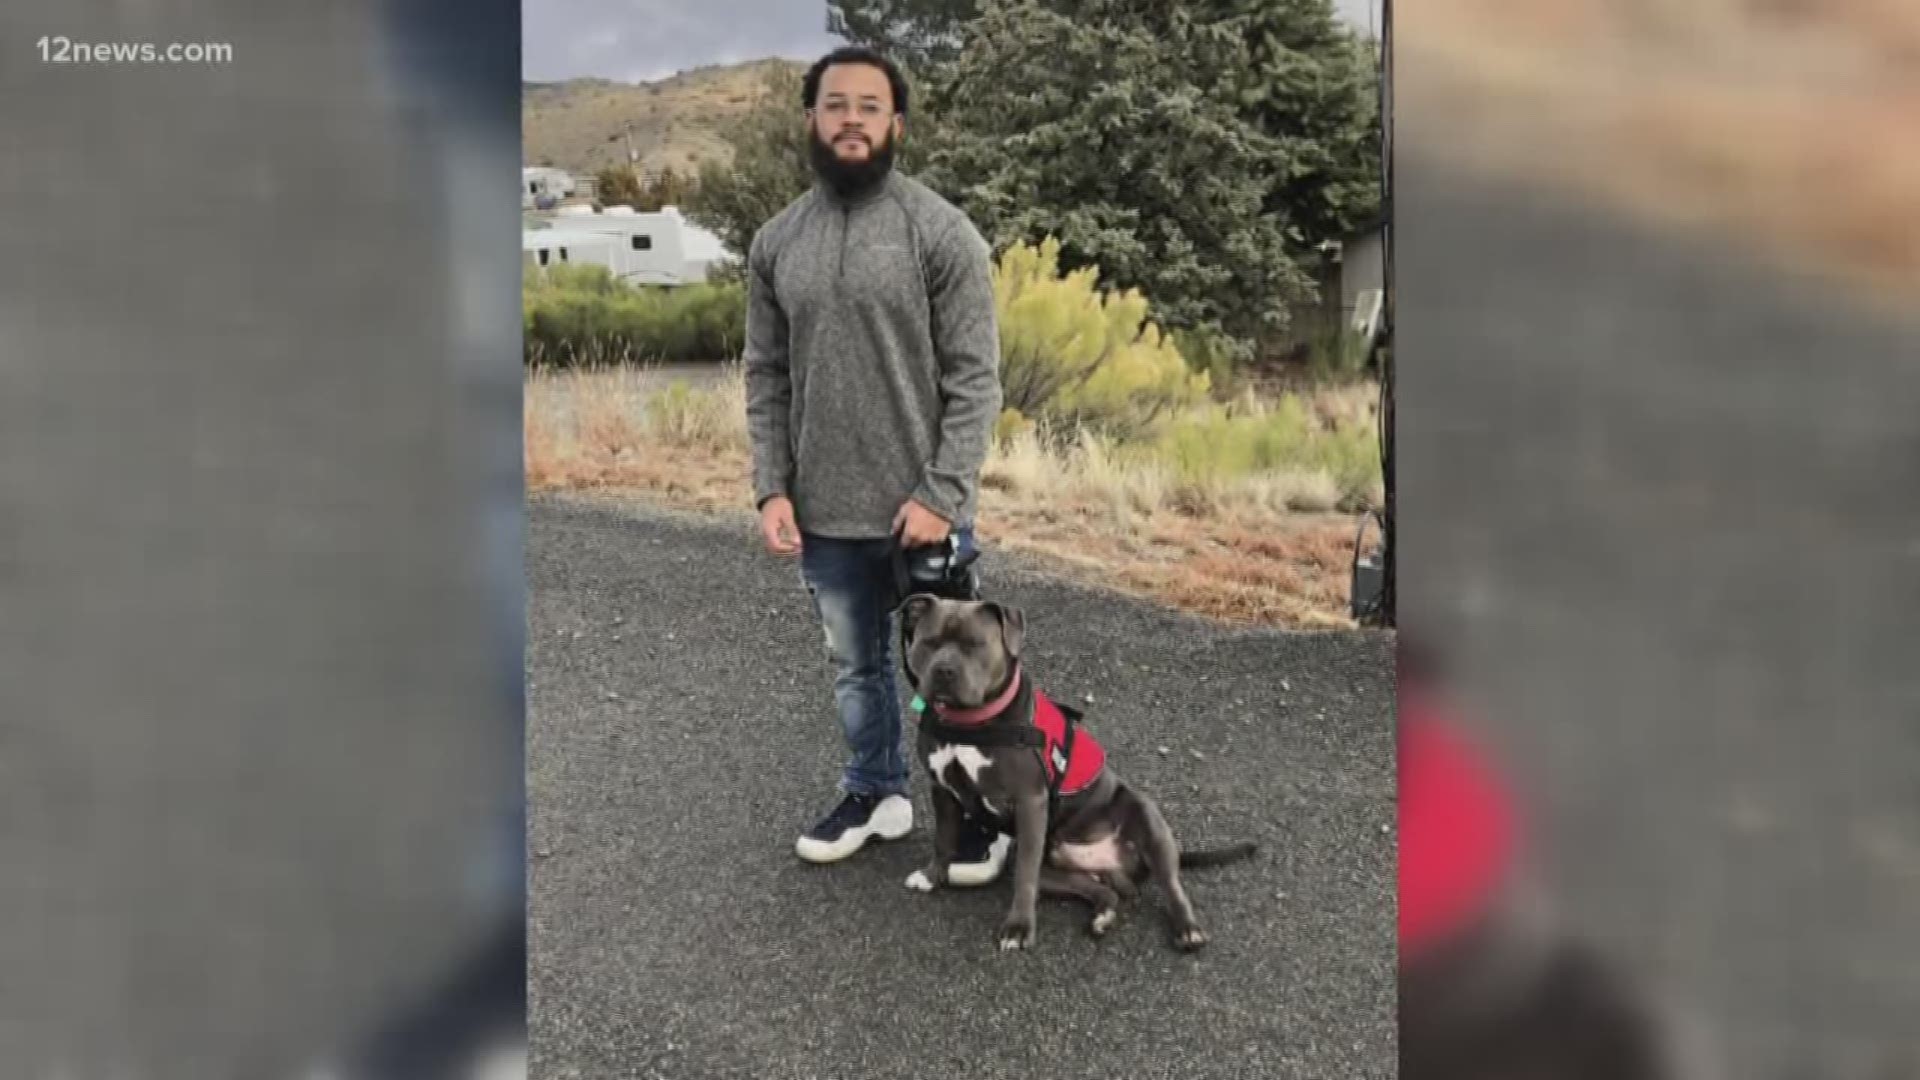 A man is stranded in Arizona because of his emotional support dog. Delta airlines let him fly here with the dog, but did not allow him to fly back home with the dog.